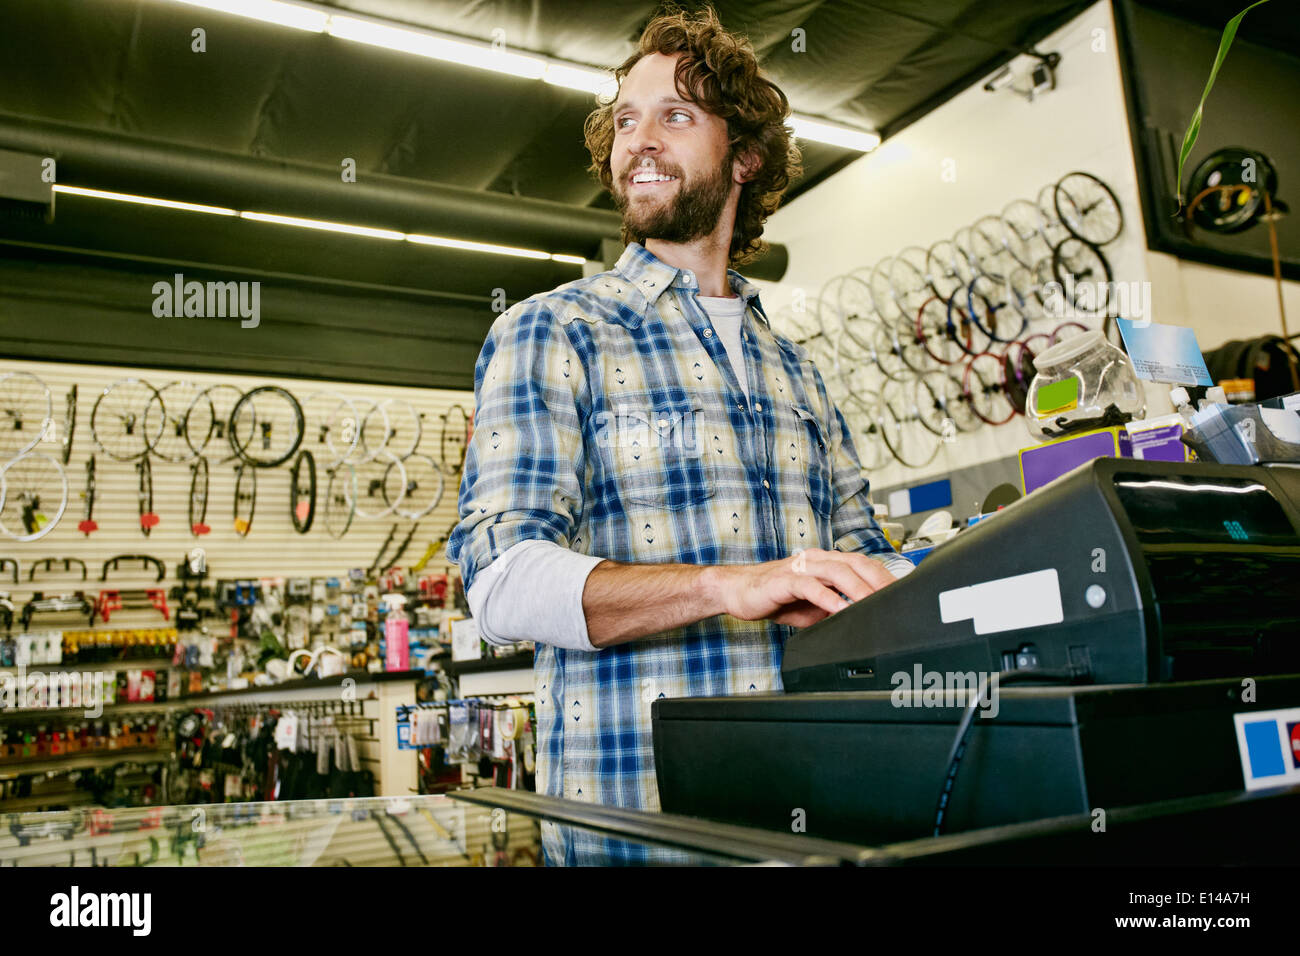 Caucasian man working in bicycle shop Stock Photo